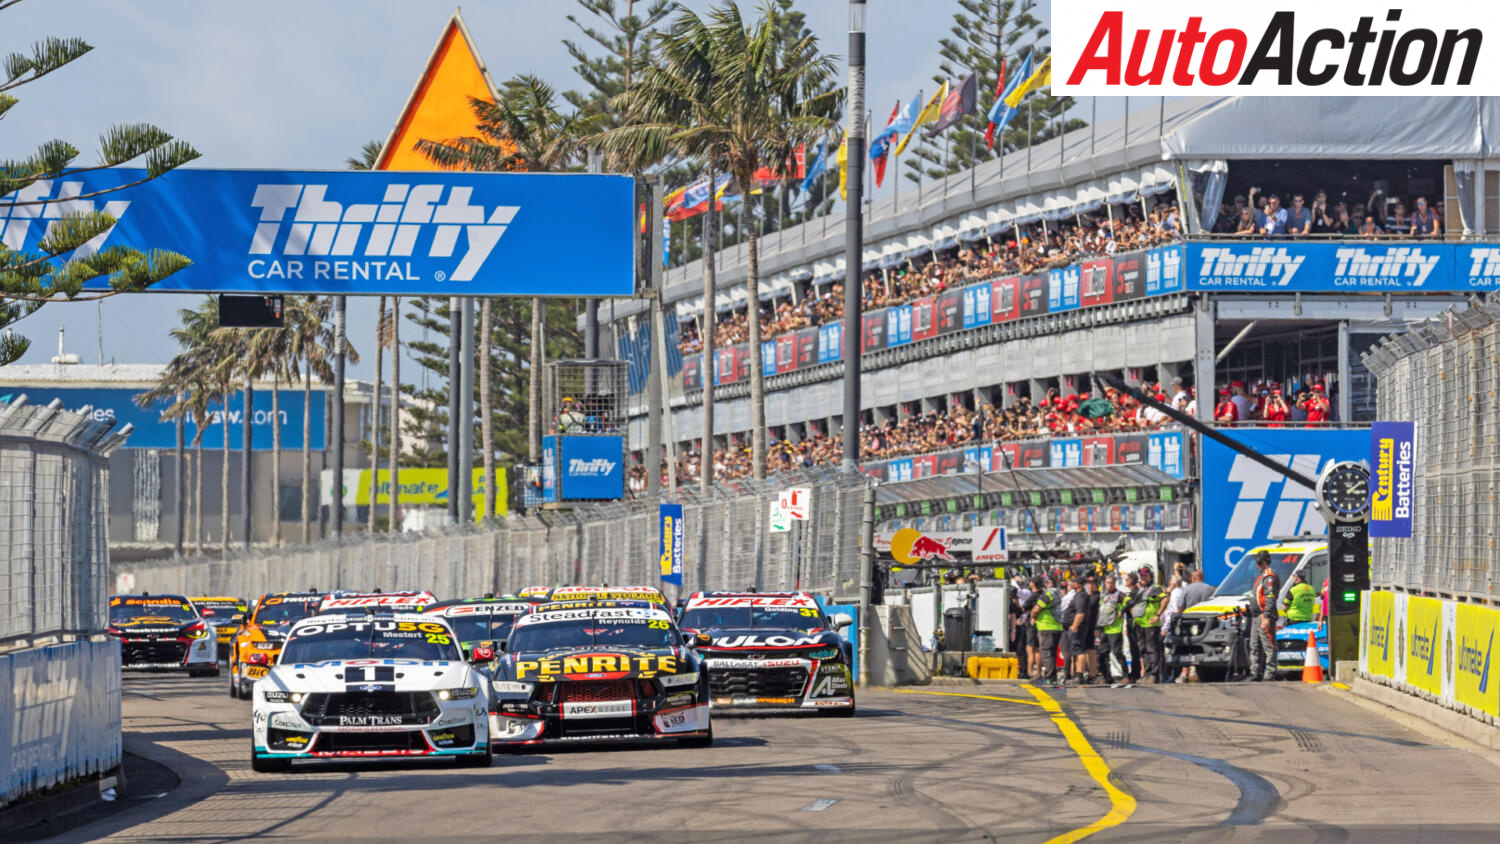 Supercars CEO Shane Howard said their track ‘kit,’ including safety fences and concrete walls, can be quickly installed – the organisation just has to find the right street race location. Image: PETER NORTON / EPIC SPORTS PHOTOGRAPHY